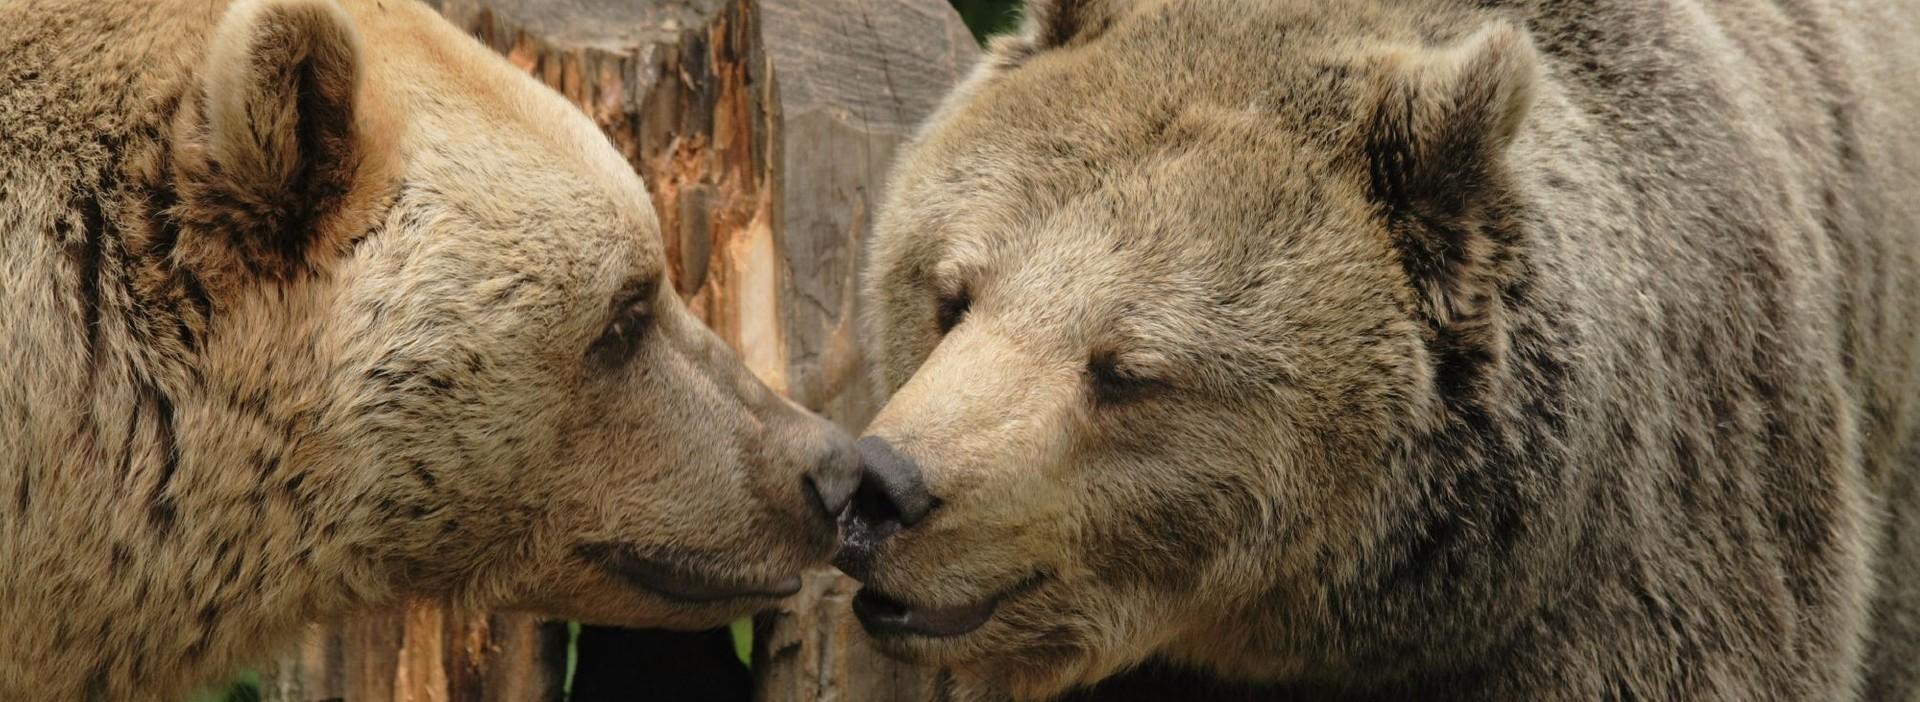 Bears Vinzenz and Brumca touching each others noses